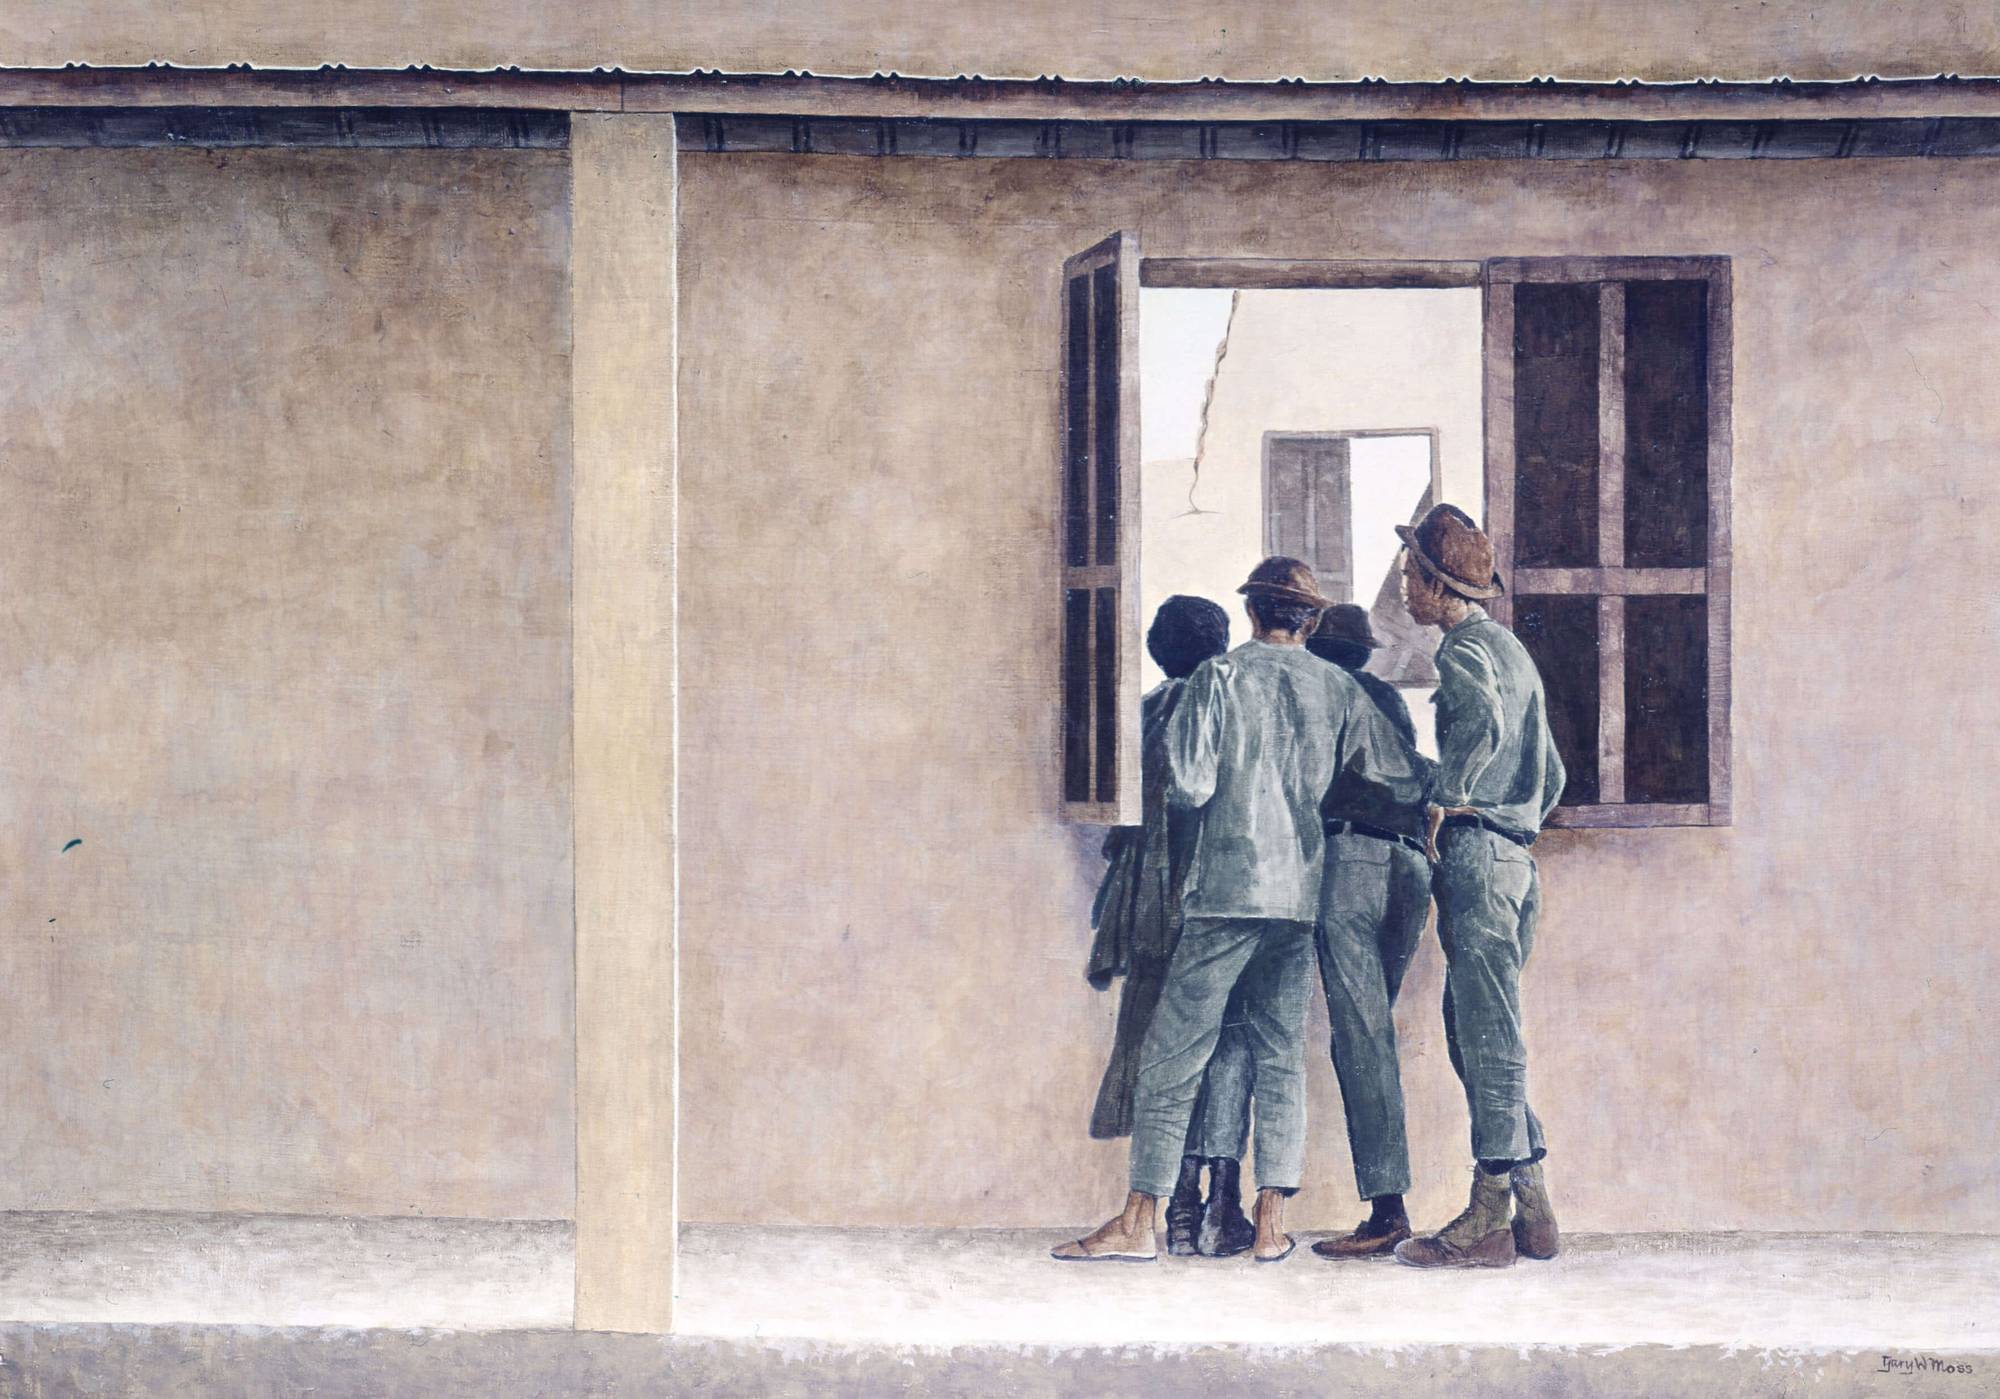 Four Asian soldiers, one in flip flops, peering into a shuttered window.